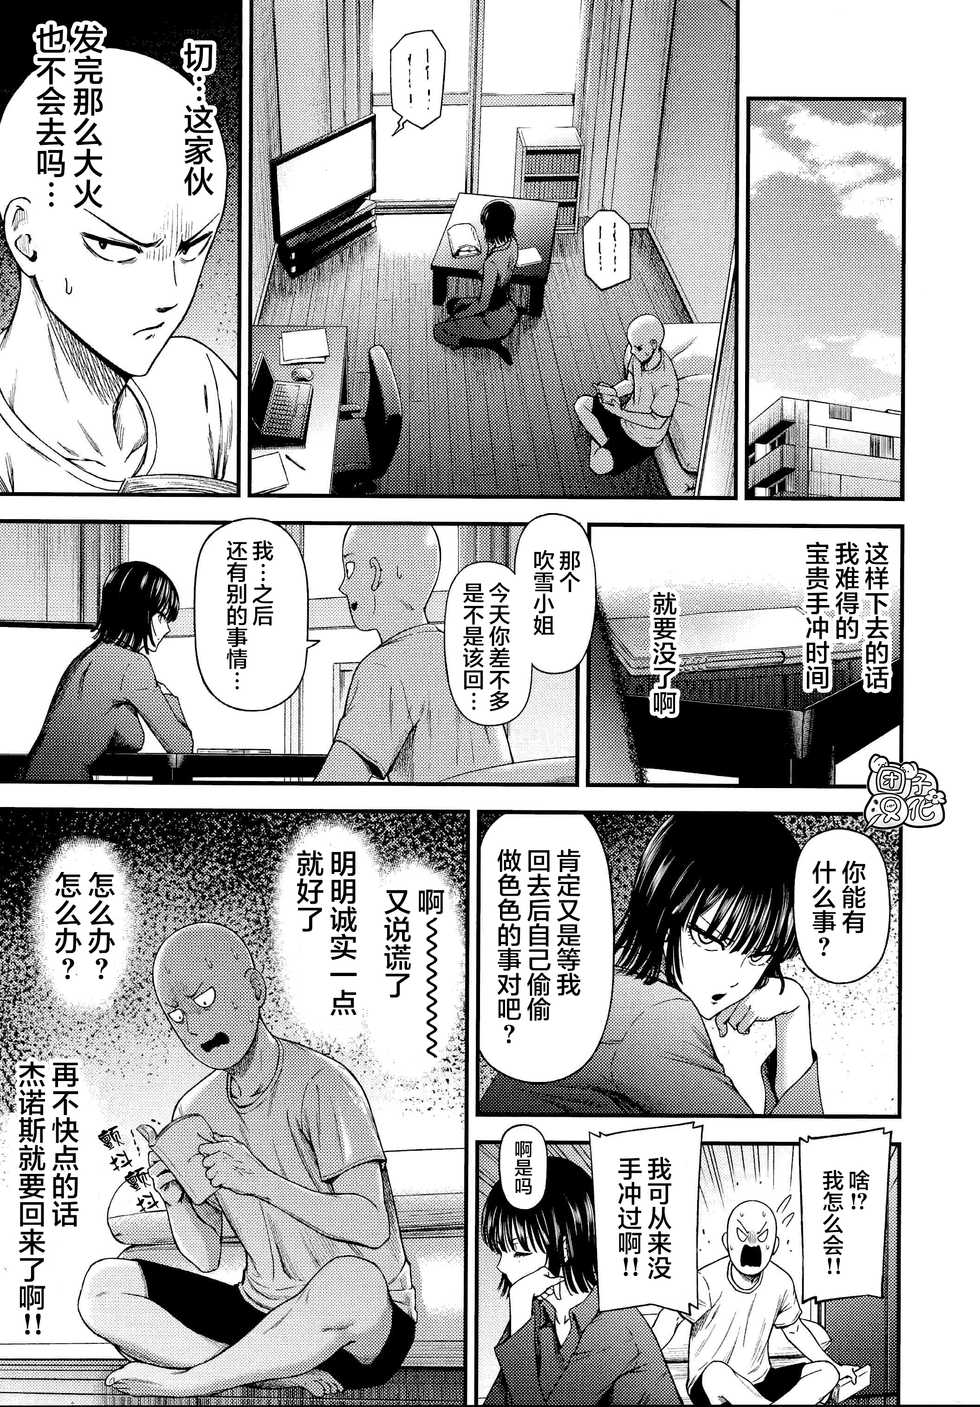 [Kiyosumi Hurricane (Kiyosumi Hurricane)] ONE-HURRICANE 6.5 (One Punch Man) [Chinese] [团子汉化组] - Page 6